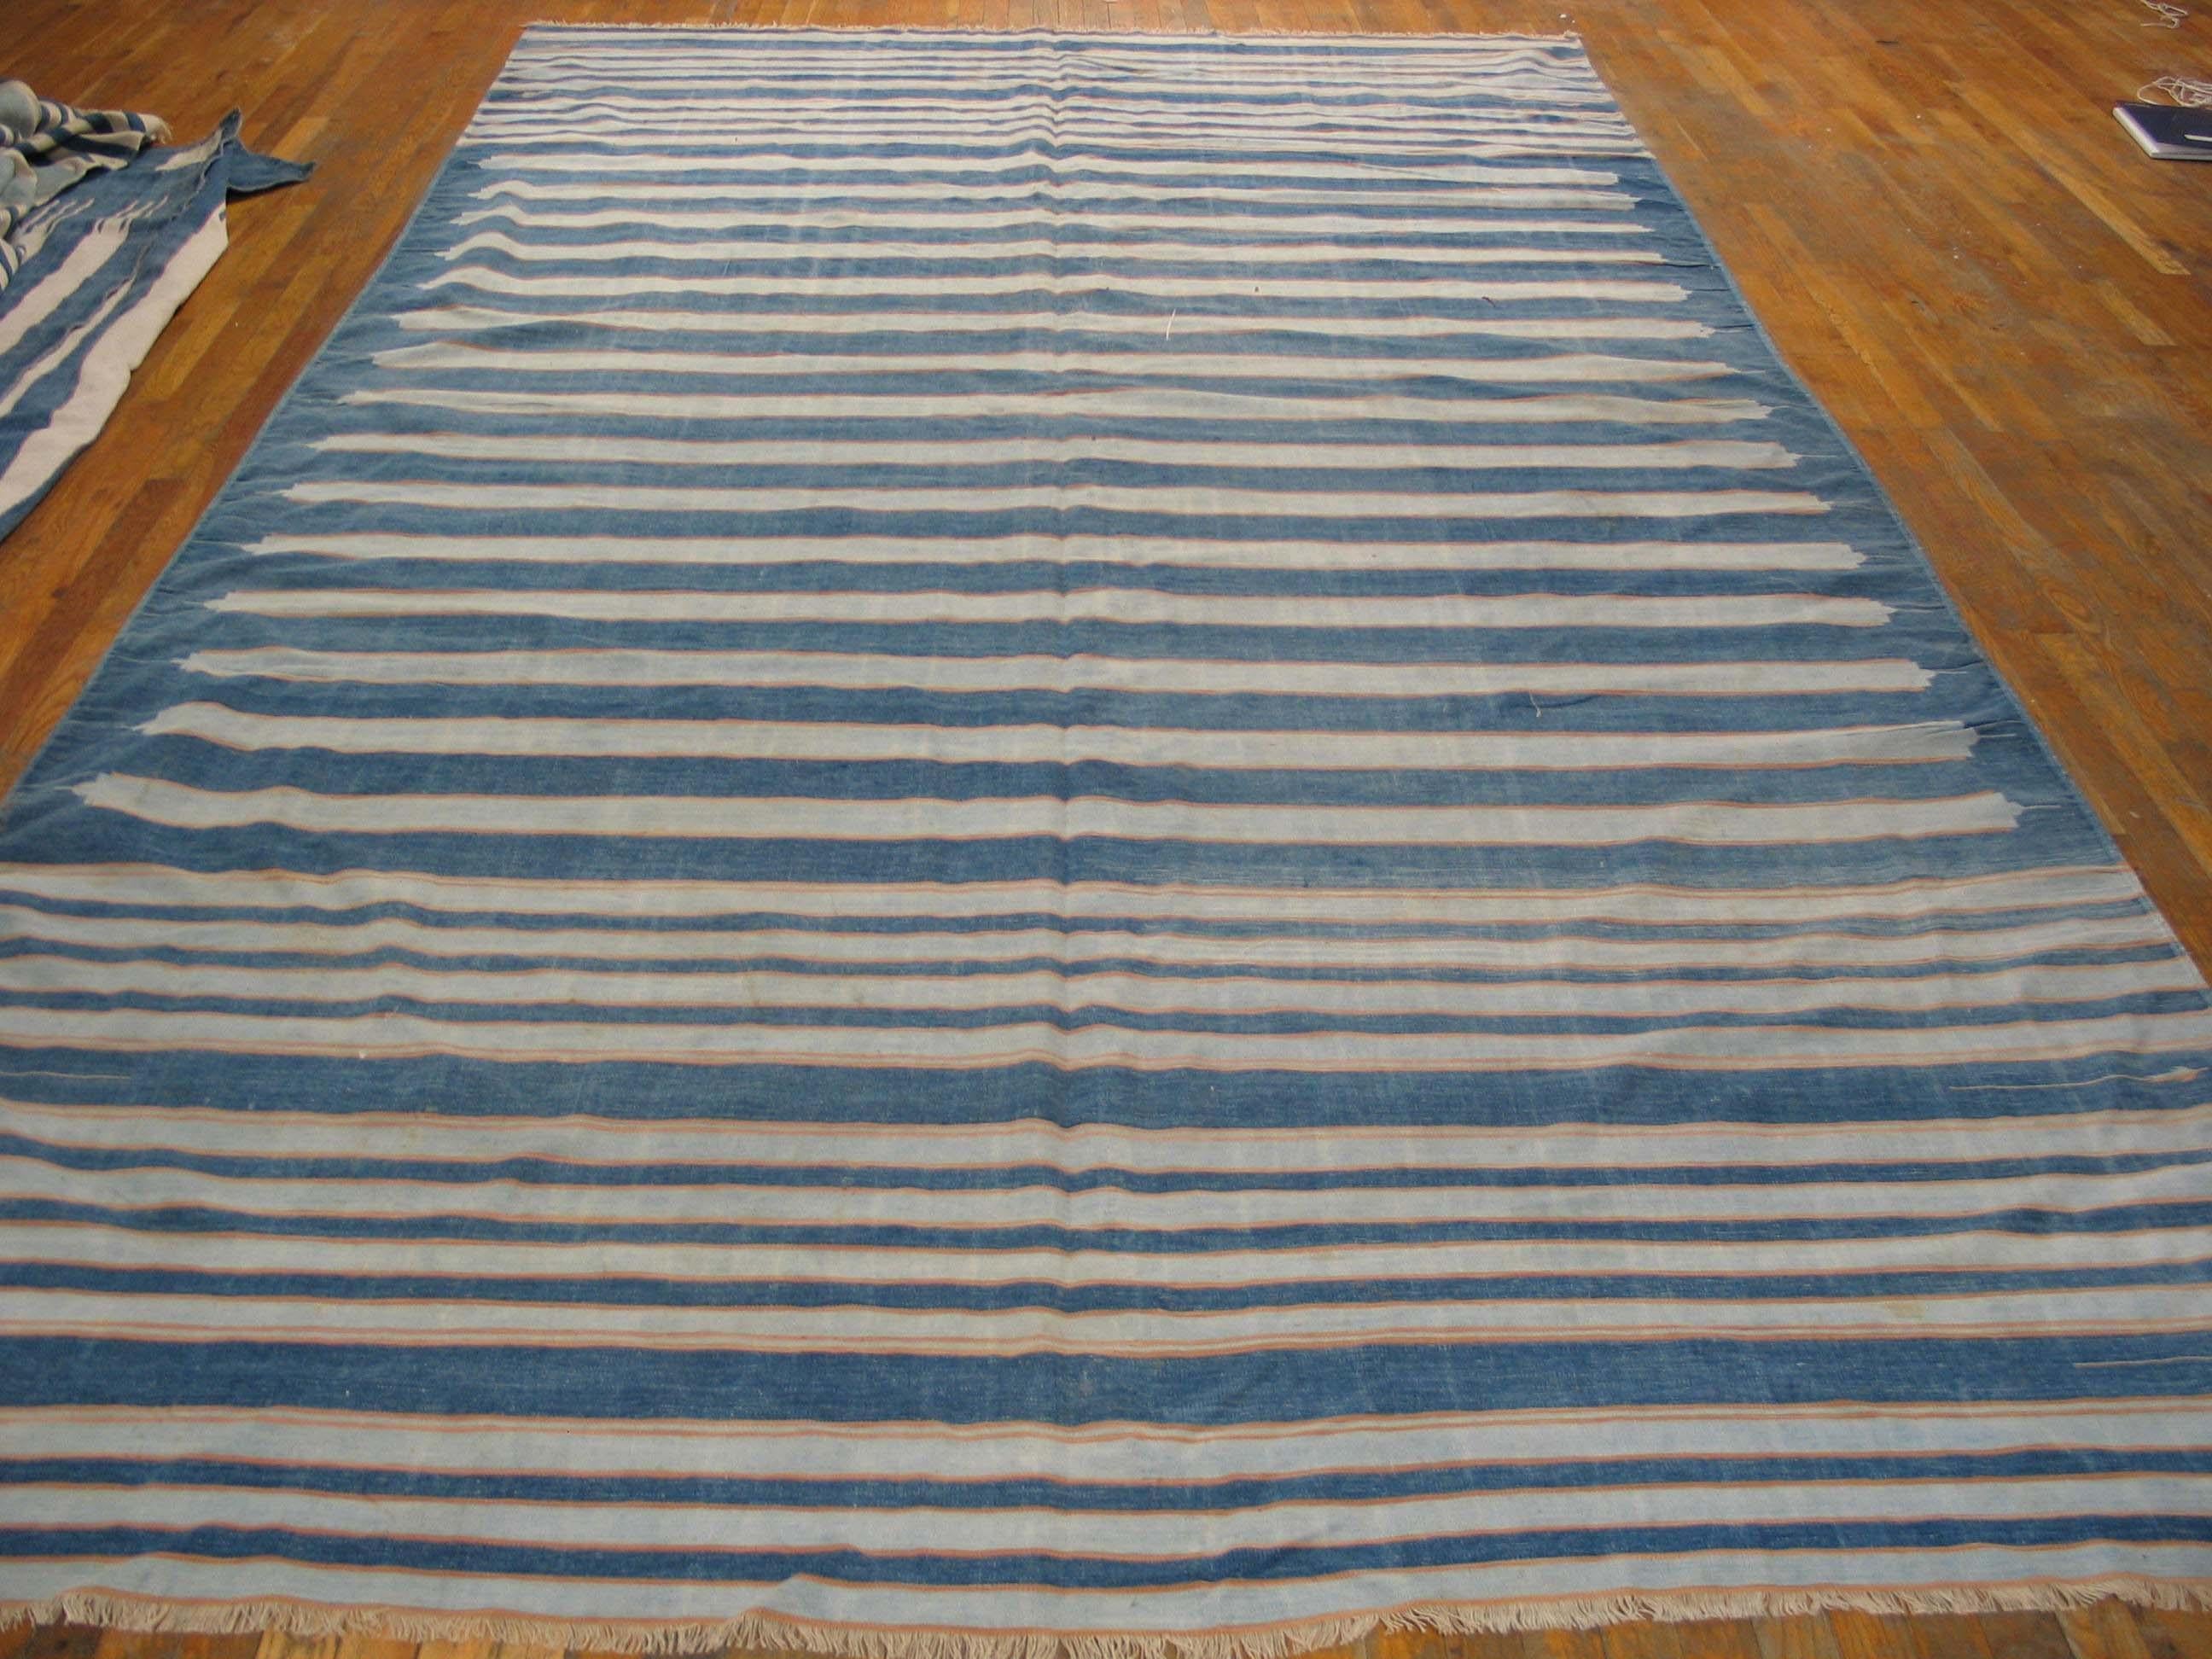 We have a dhurrie for ANY sized room, in minimalist blue-and-white especially. Indian weavers love stripes and the ease of weaving plays into a restricted palette as well. The soft denim blue central area shows point-truncated off white stripes with